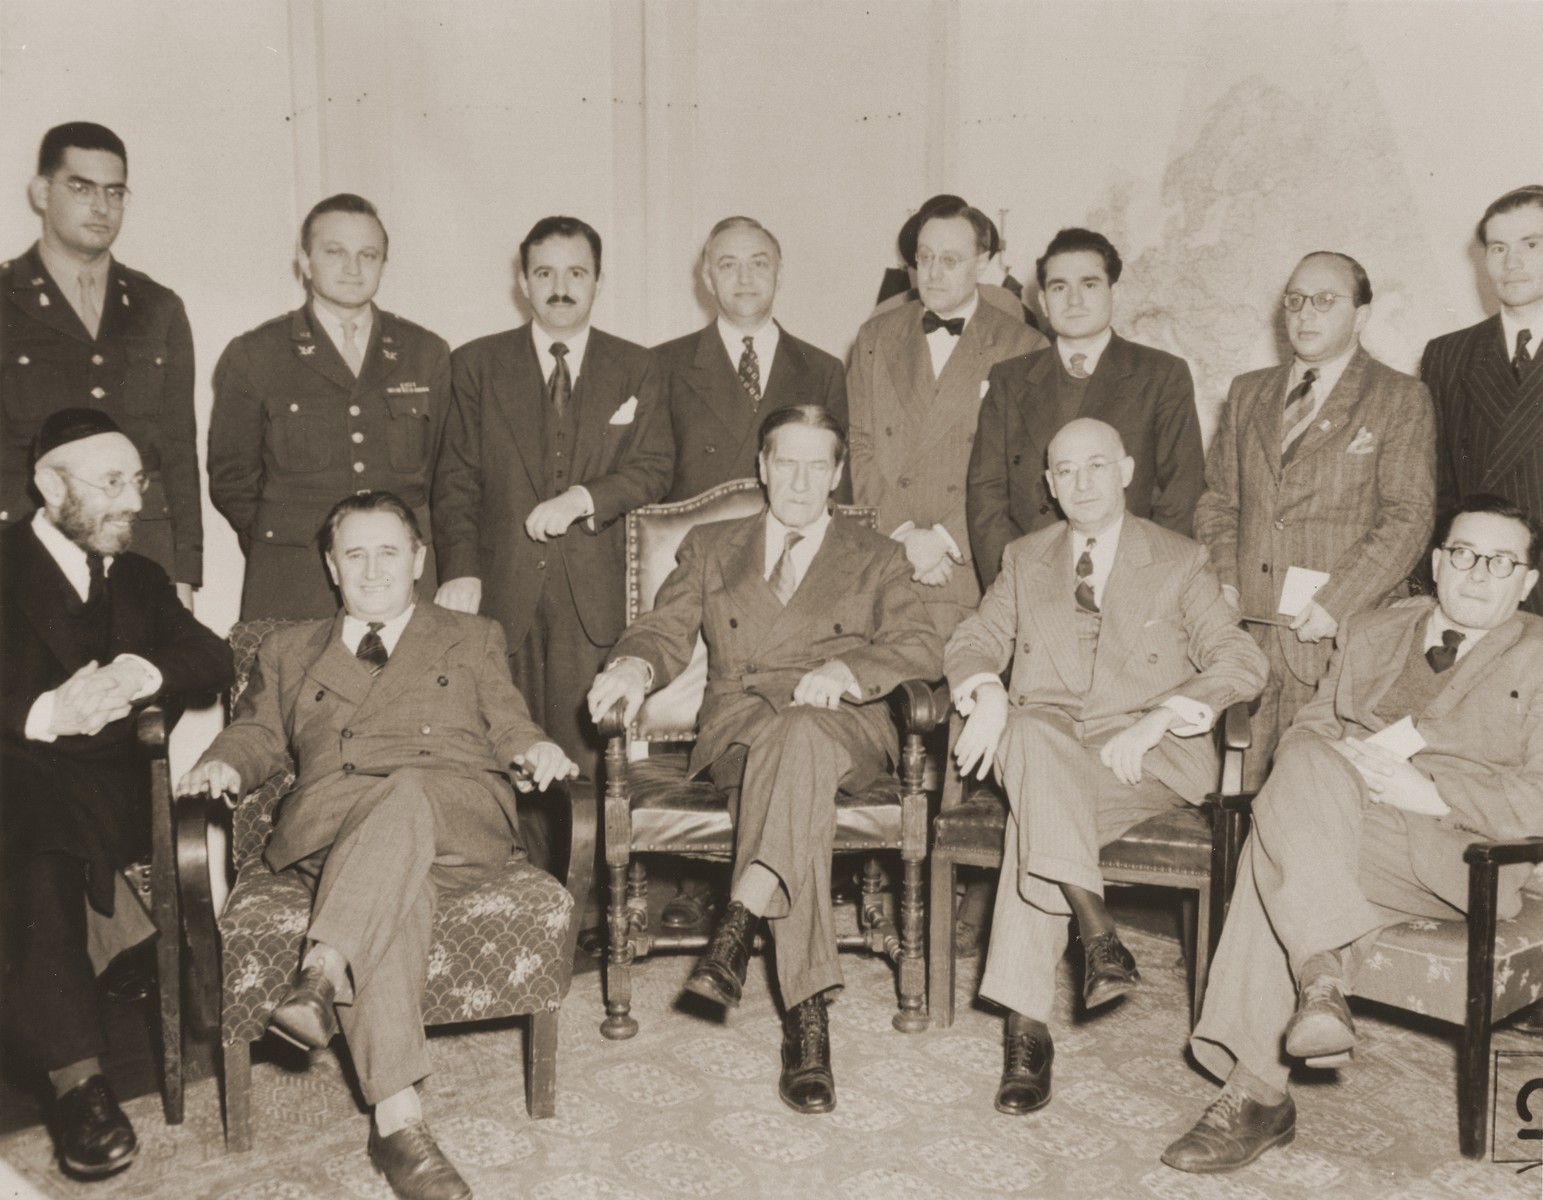 Group portrait of participants at a meeting between Jewish DP leaders and visiting American Jewish leaders in the American Zone of Germany.

Pictured in the back row, from left to right, are: Rabbi Herbert Friedman; Abraham Hyman; Isaiah Kennen; Philip Bernstein; Philip Forman; Leon Retter (Aryeh Nesher); Boris Pliskin; Rabbi Gerhard Rose. In the front row from left to right, are: Rabbi Samuel Snieg; Nahum Goldmann; Rabbi Stephen Wise; Jacob Blaustein; and Samuel Gringauz.